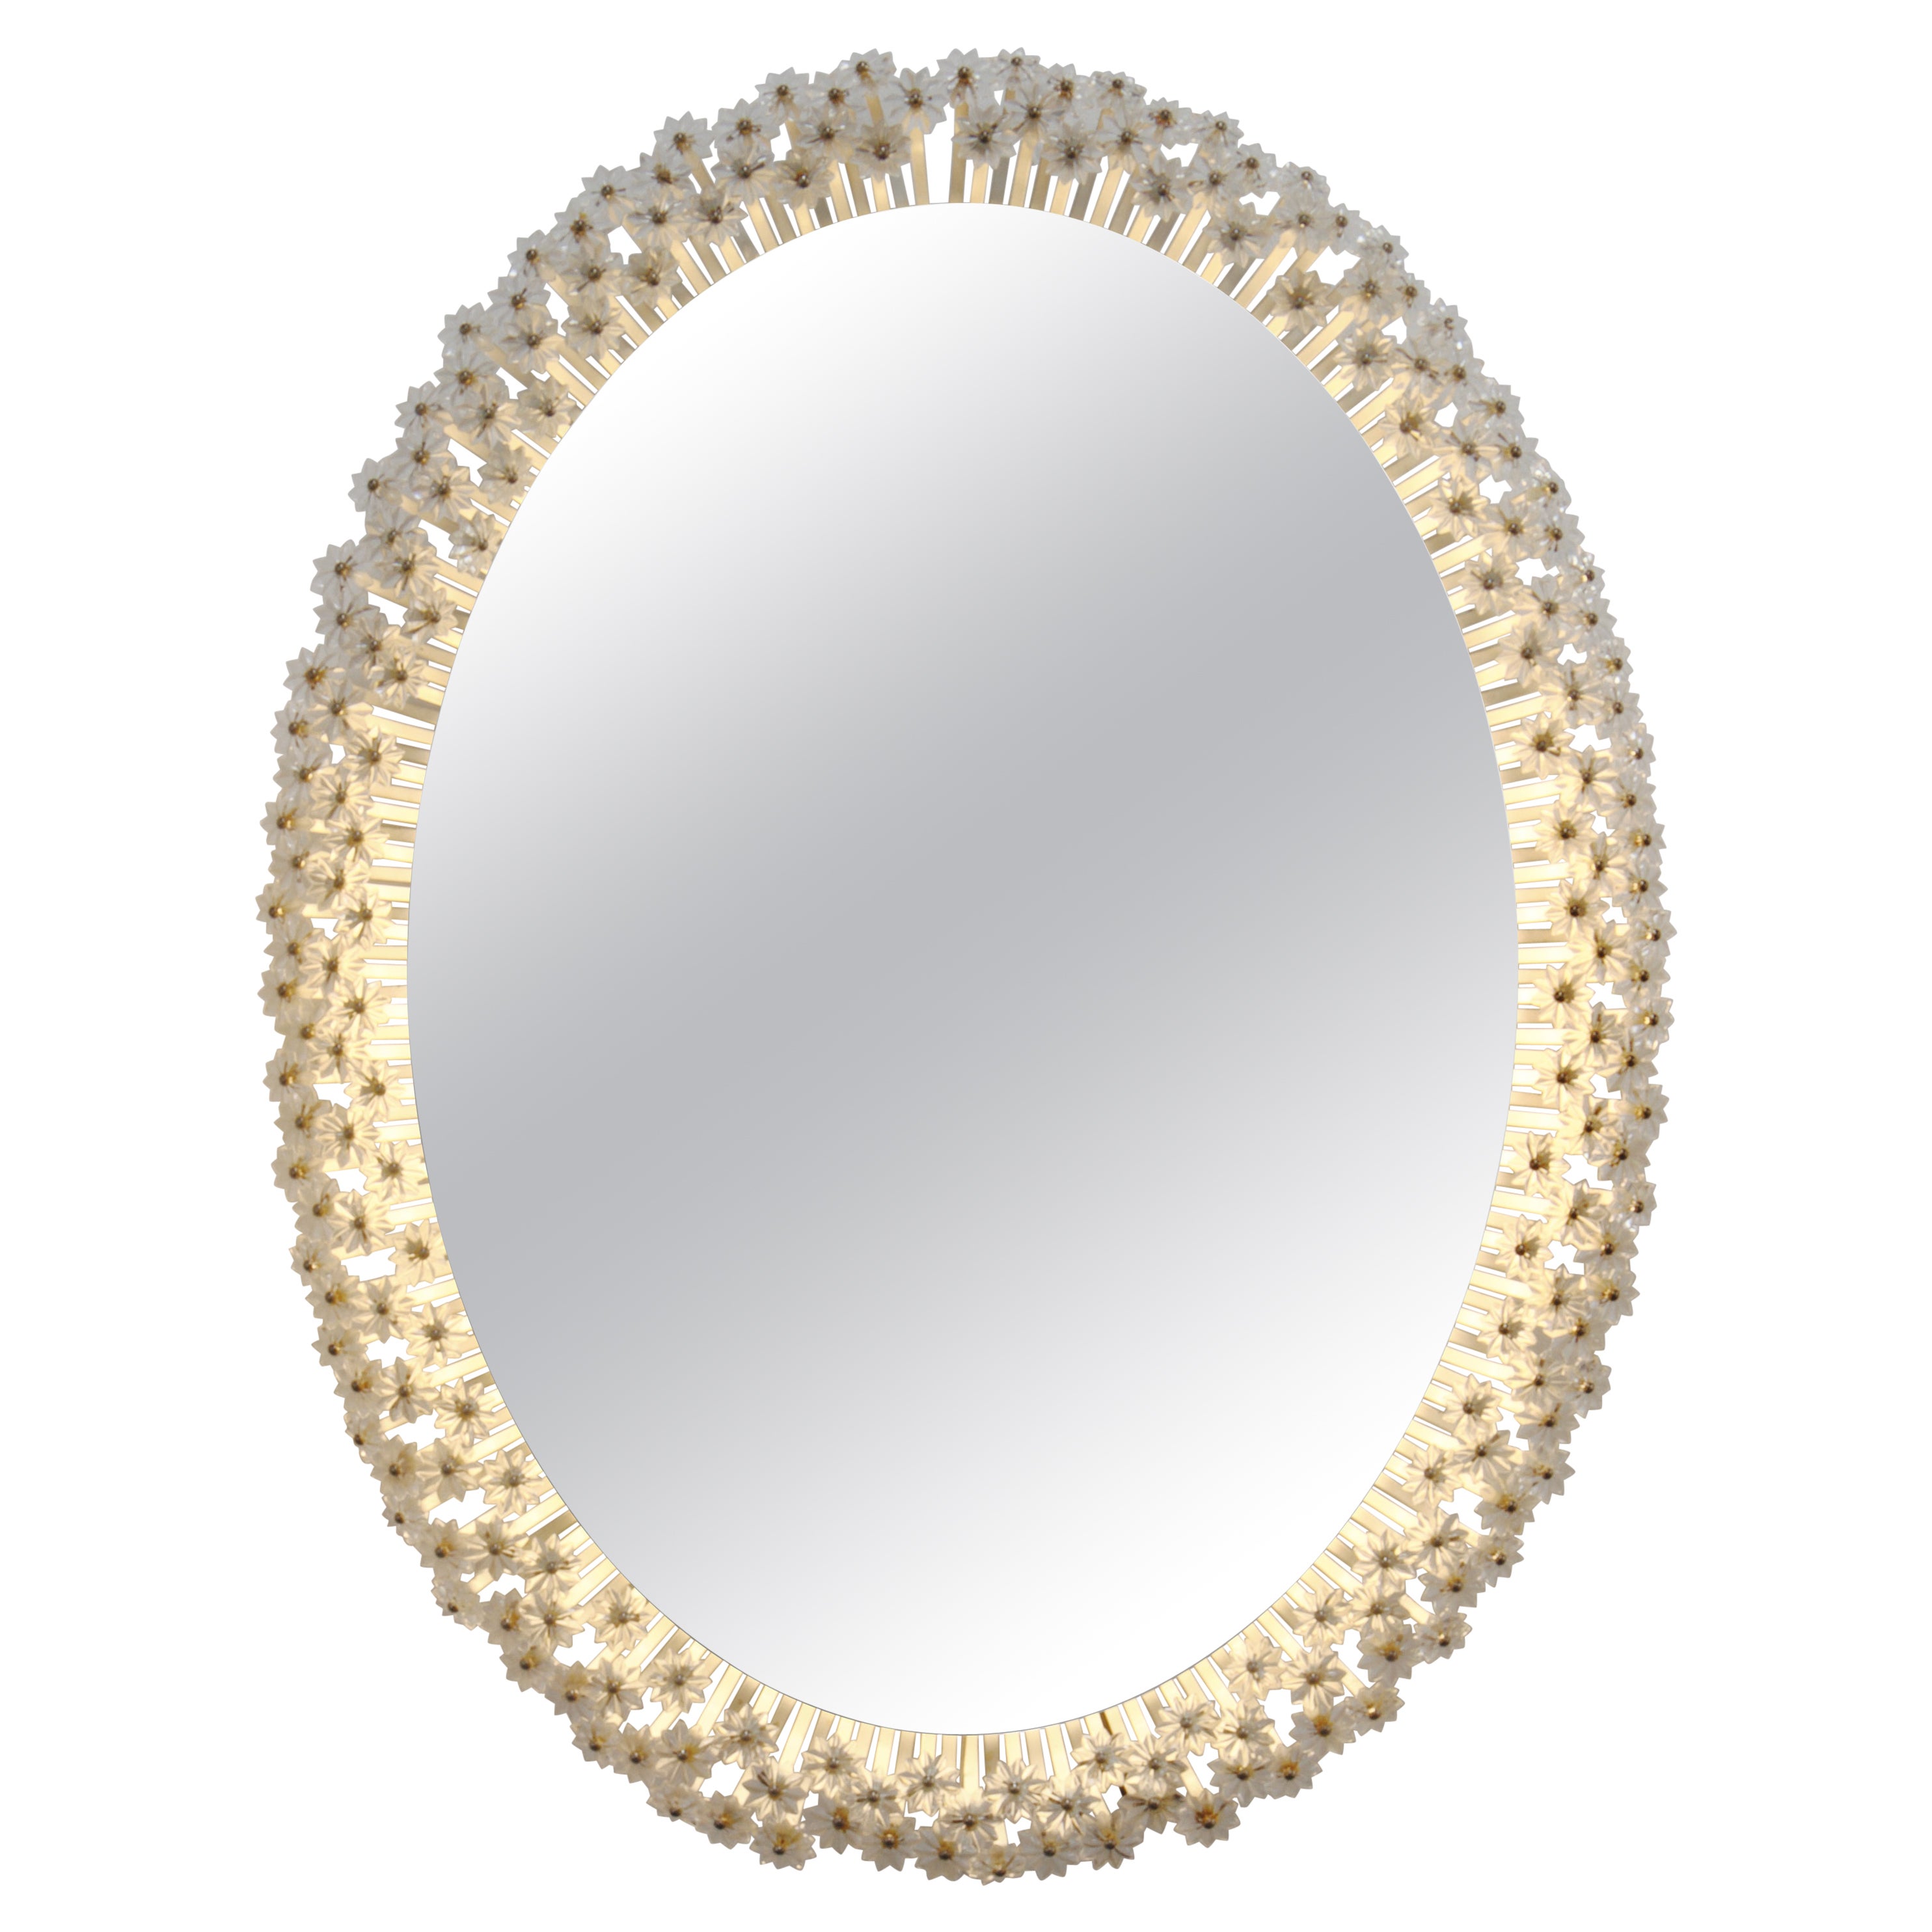 Emil Stejnar Oval Wall Mirror with 200+ Backlit Austrian Crystals For Sale